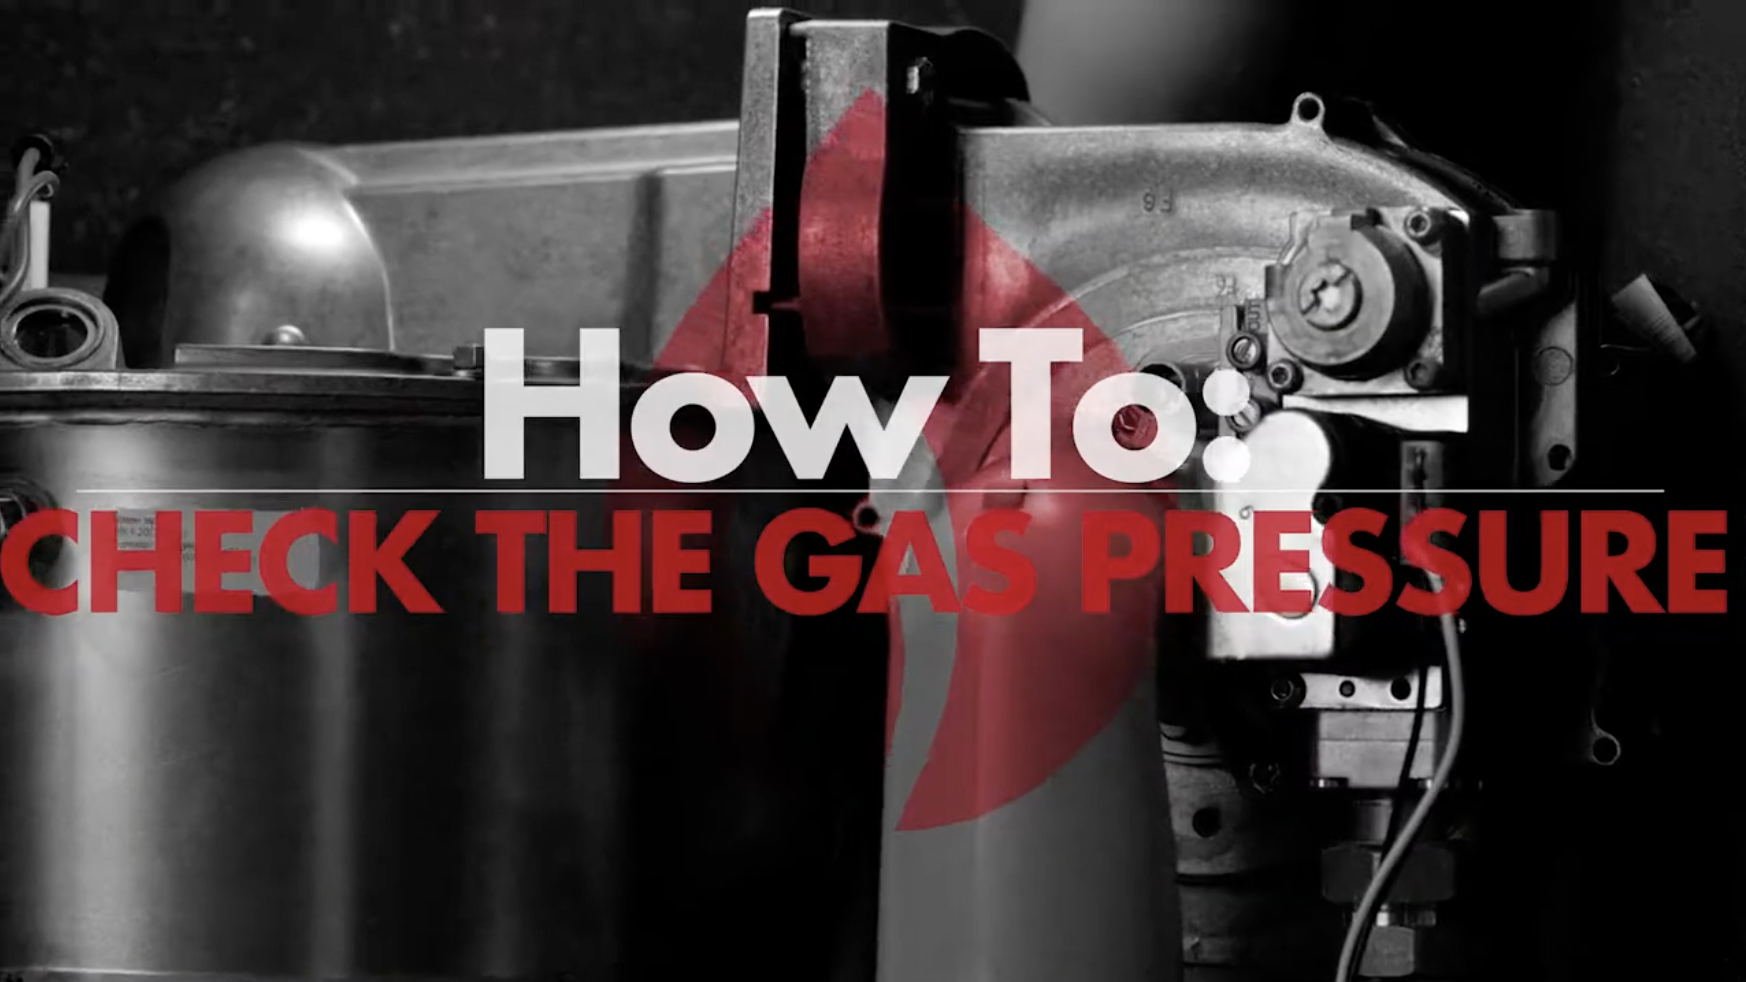 How To: Check The Gas Pressure